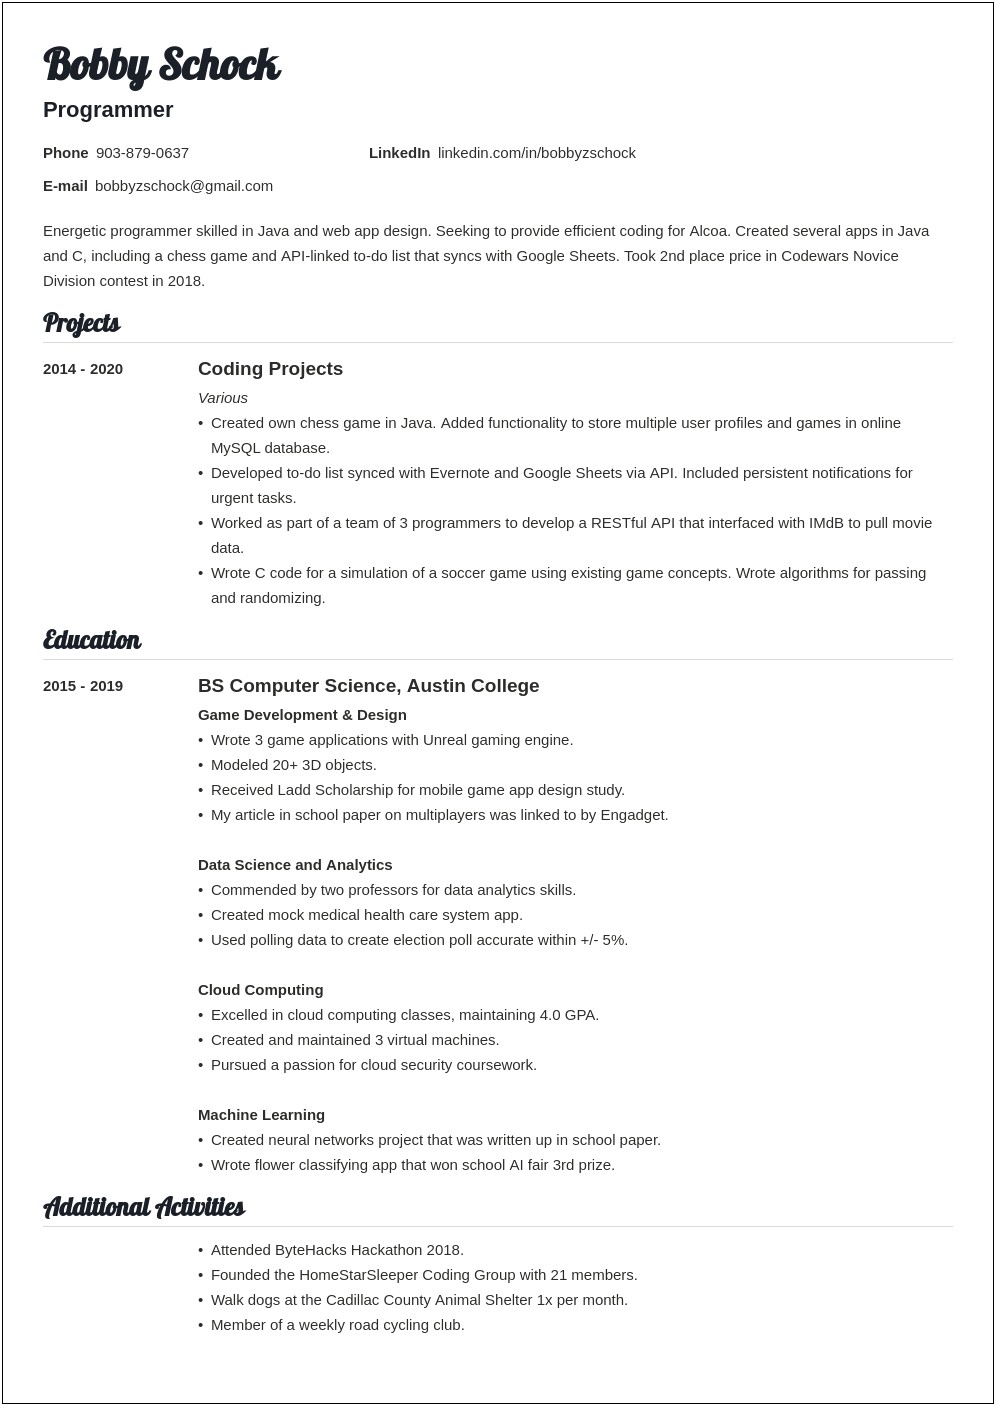 Resume Summary With No Experience Examples